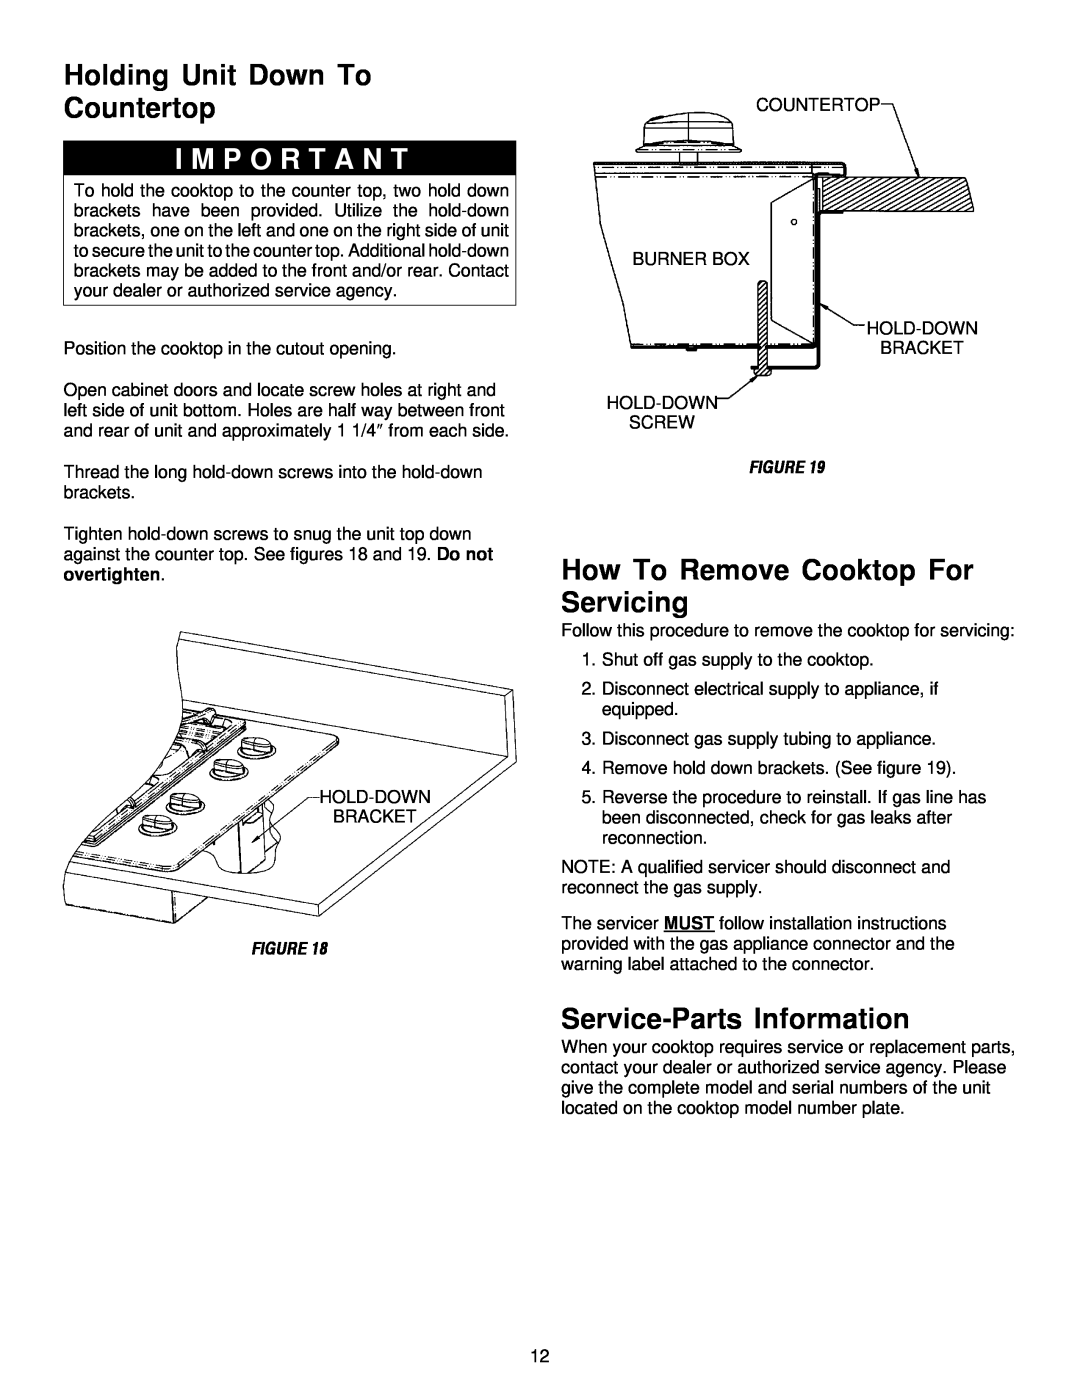 Maytag MGC5536 Holding Unit Down To Countertop, How To Remove Cooktop For Servicing, Service-Parts Information 